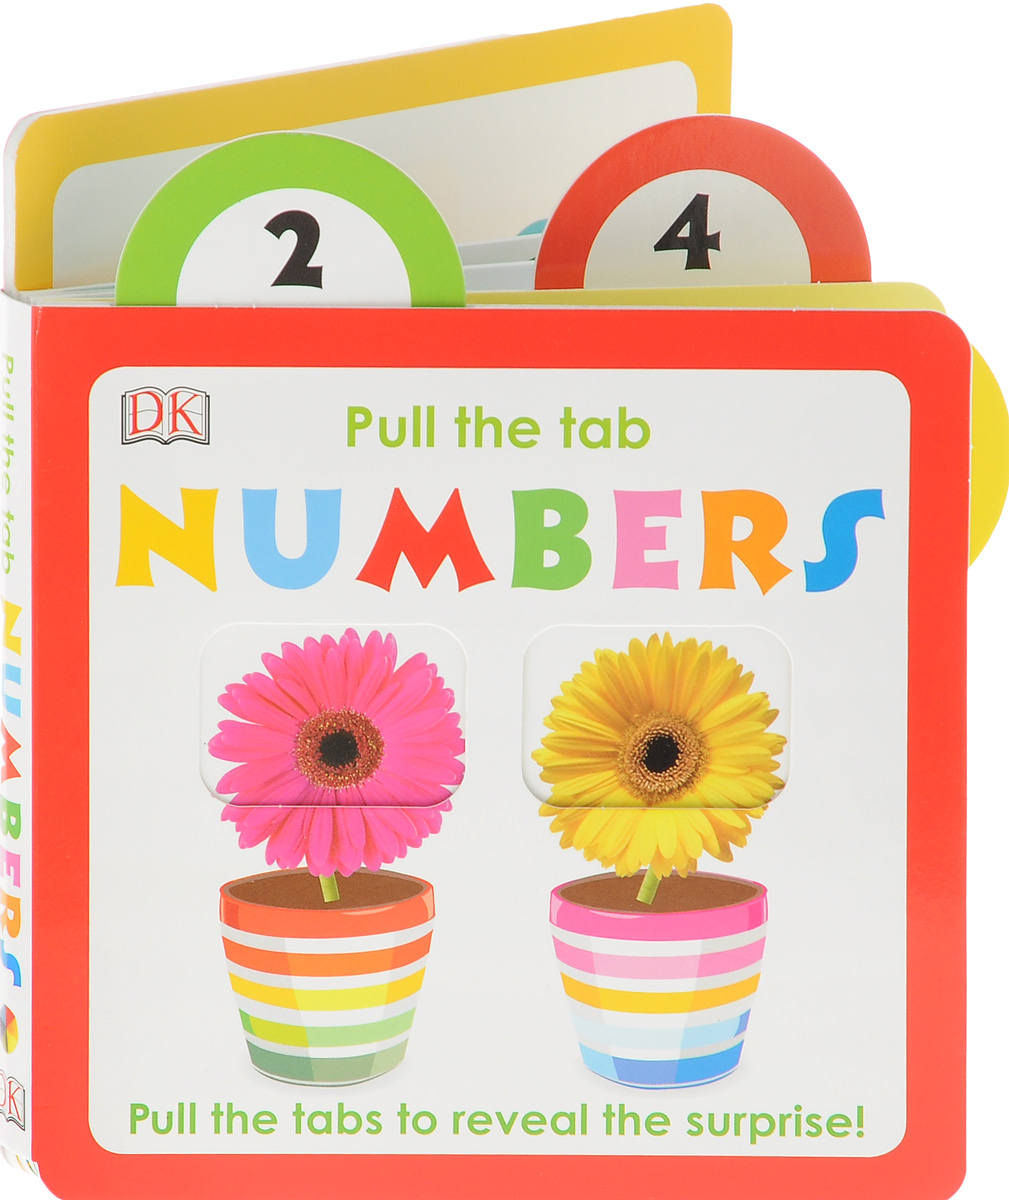 Pull the Tab: Numbers12296407Bring the fun world of numbers to your toddler with this edition of Pull the Tab Pull the Tab Numbers introduces numbers and simple counting skills to your toddler. The clear labels and simple rhyming text brings numbers to life for your child and help them in developing number and counting skills. This new book from the Pull the Tab series will help your toddler easily learning numbers, and is perfect for you to help your child and encourage their early learning. The pop ups promote sensory skills and the names and labels encourage recognition. Pull the Tab Numbers is perfect for toddlers ready to tackle numbers!